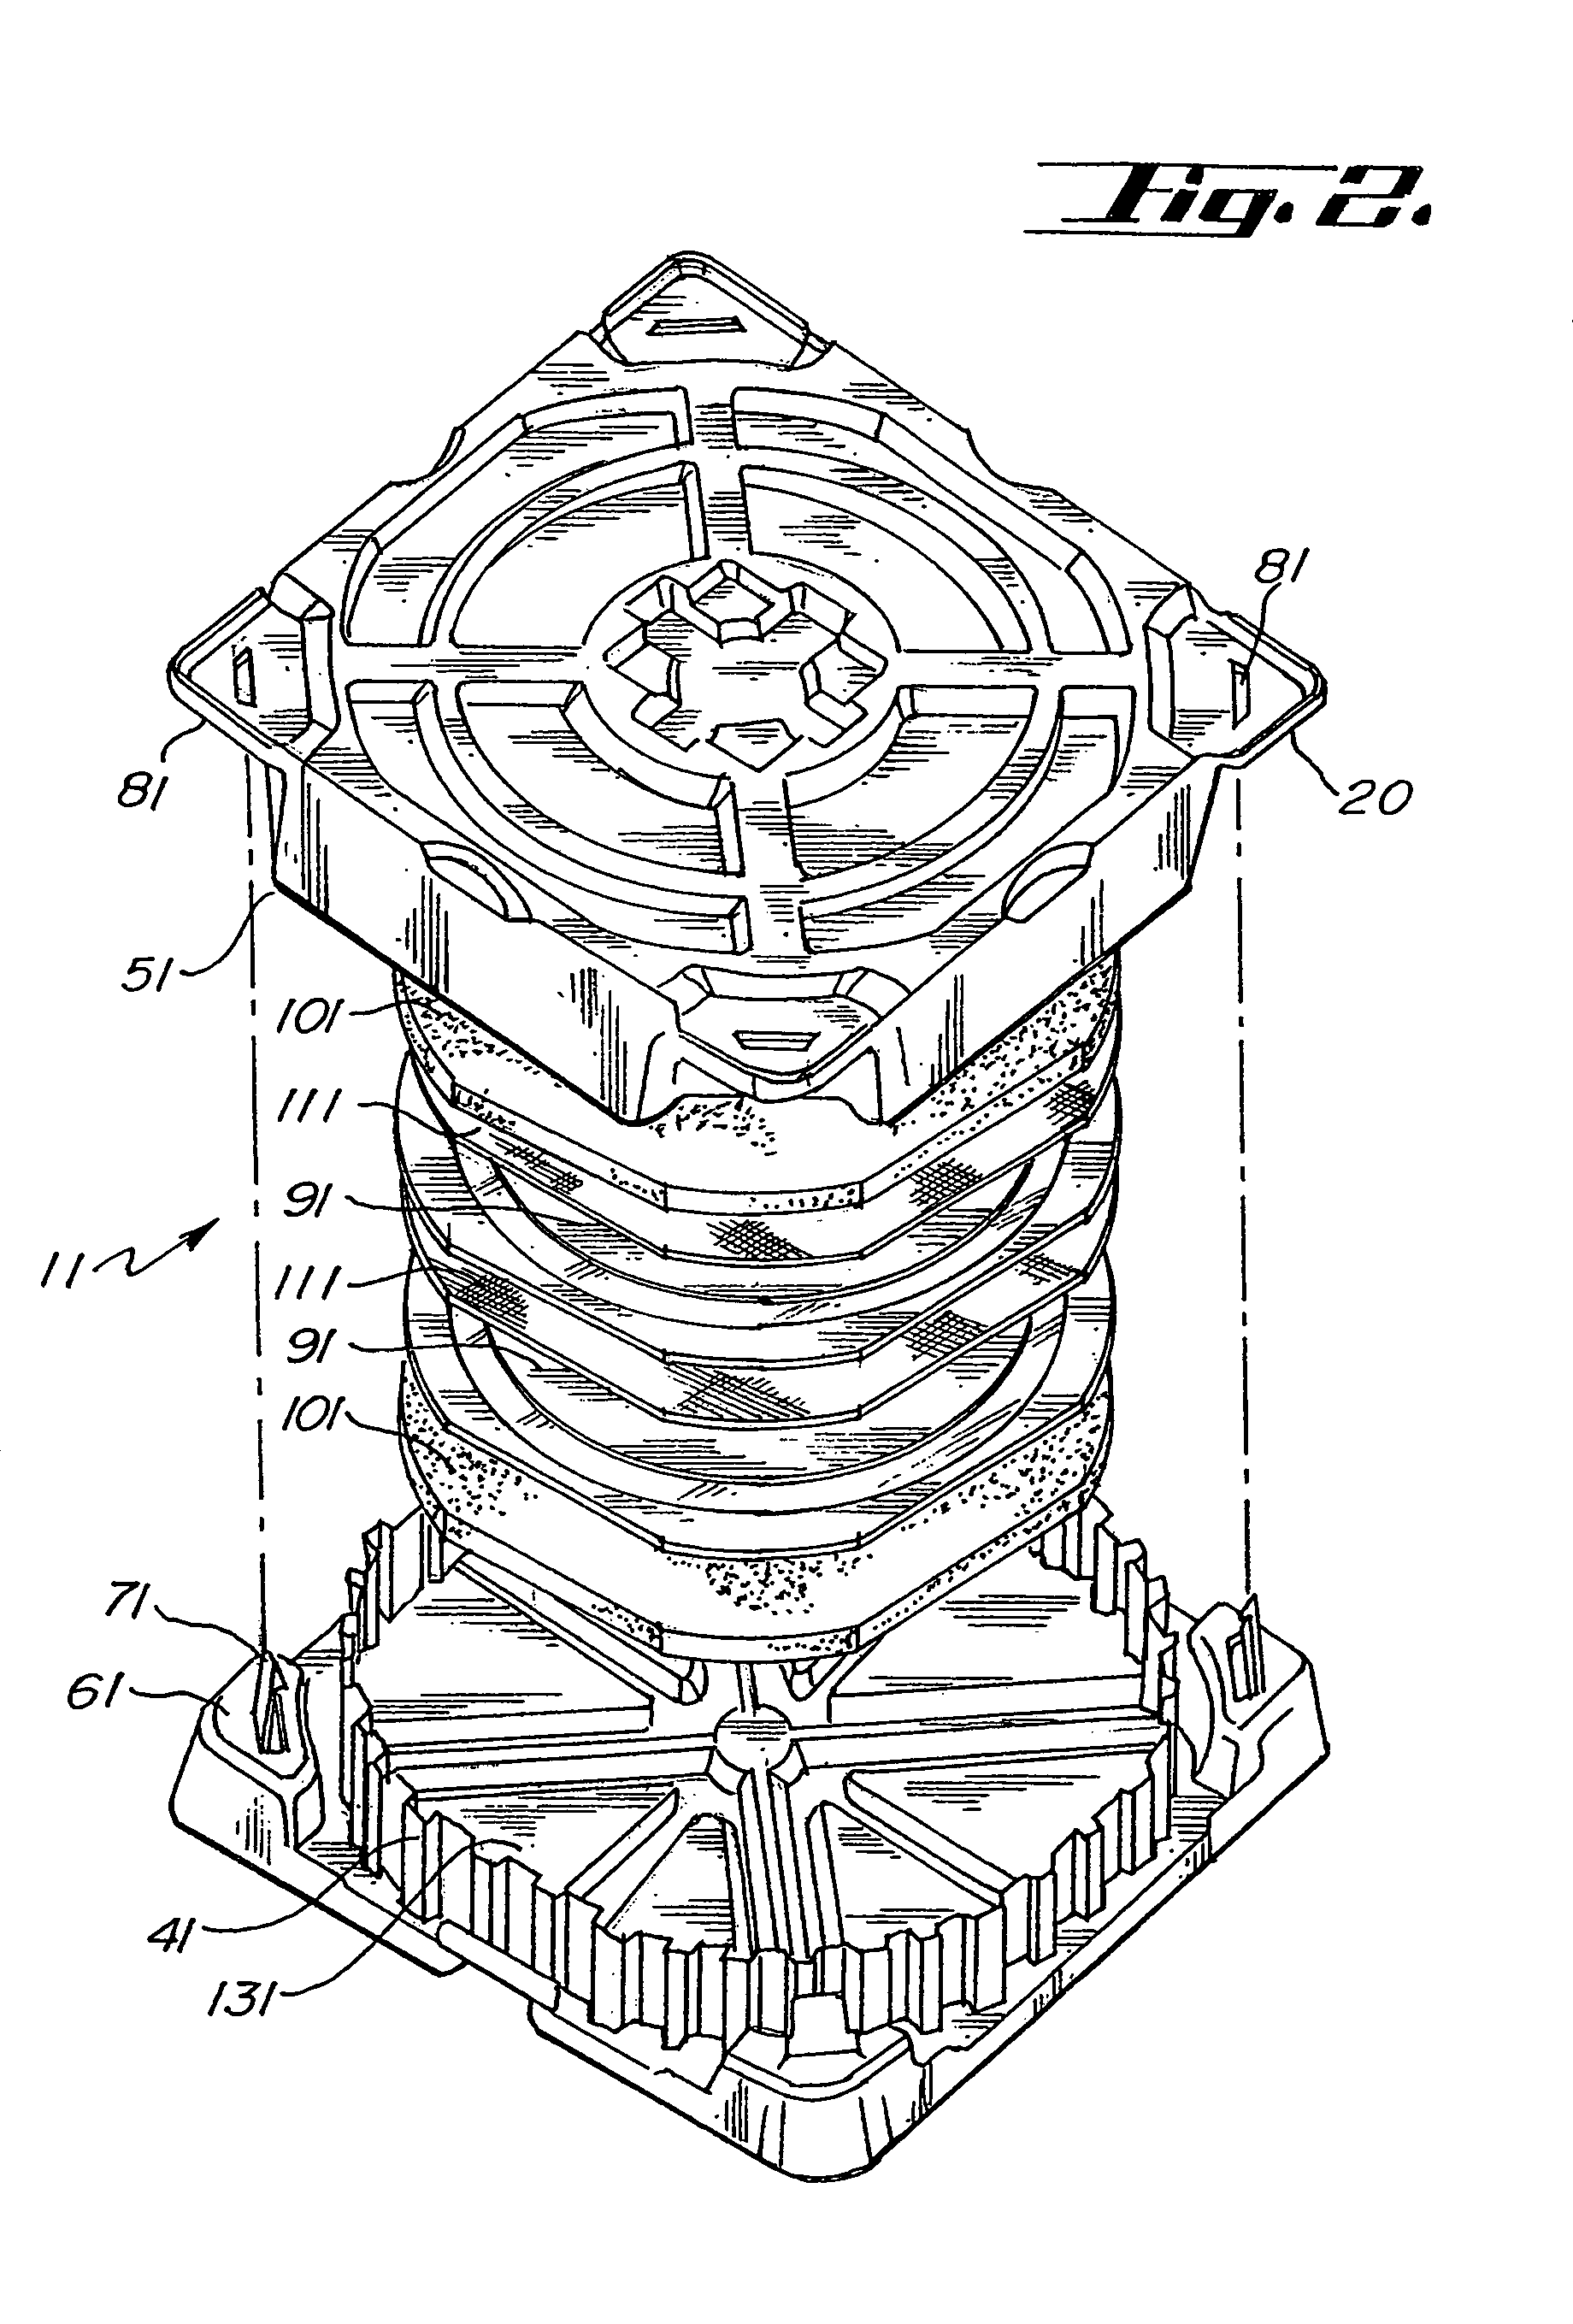 System for cushioning wafer in wafer carrier